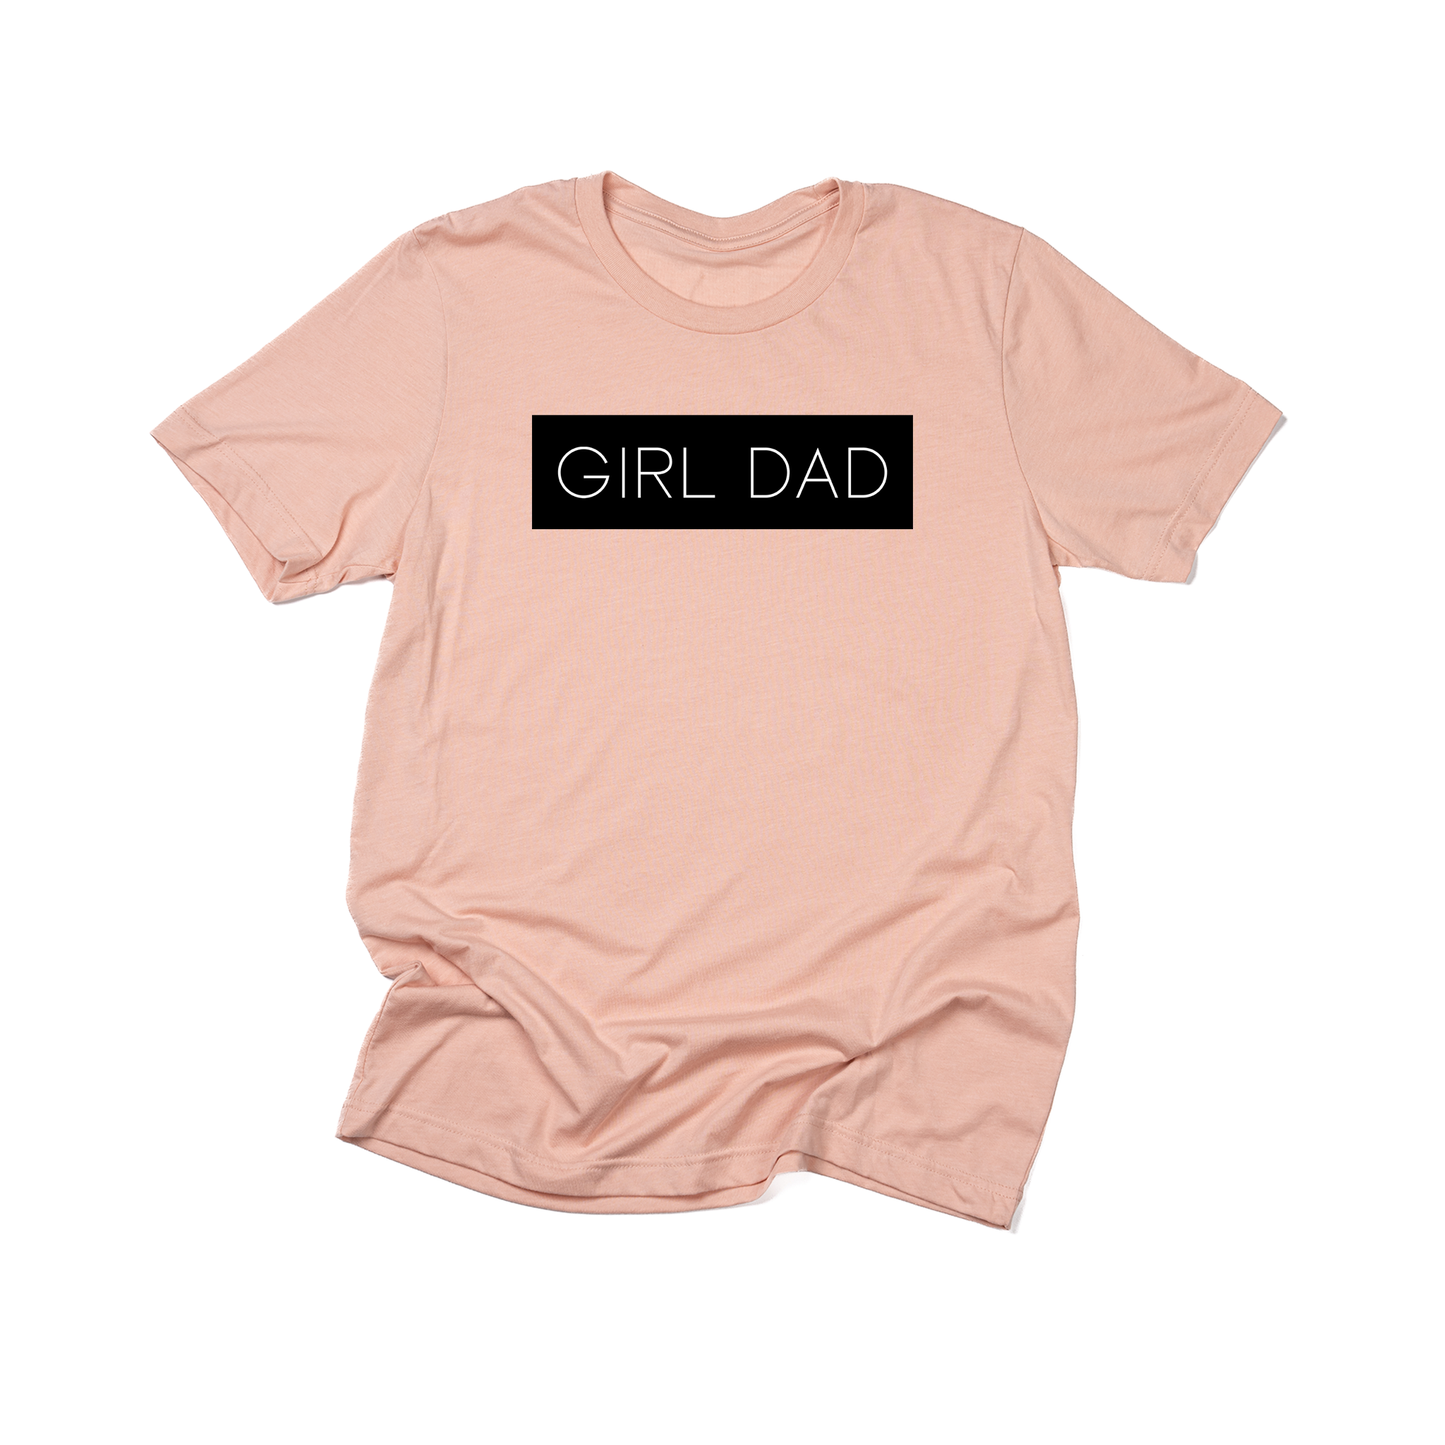 Girl Dad® (Boxed Collection, Black Box/White Text) - Tee (Peach)